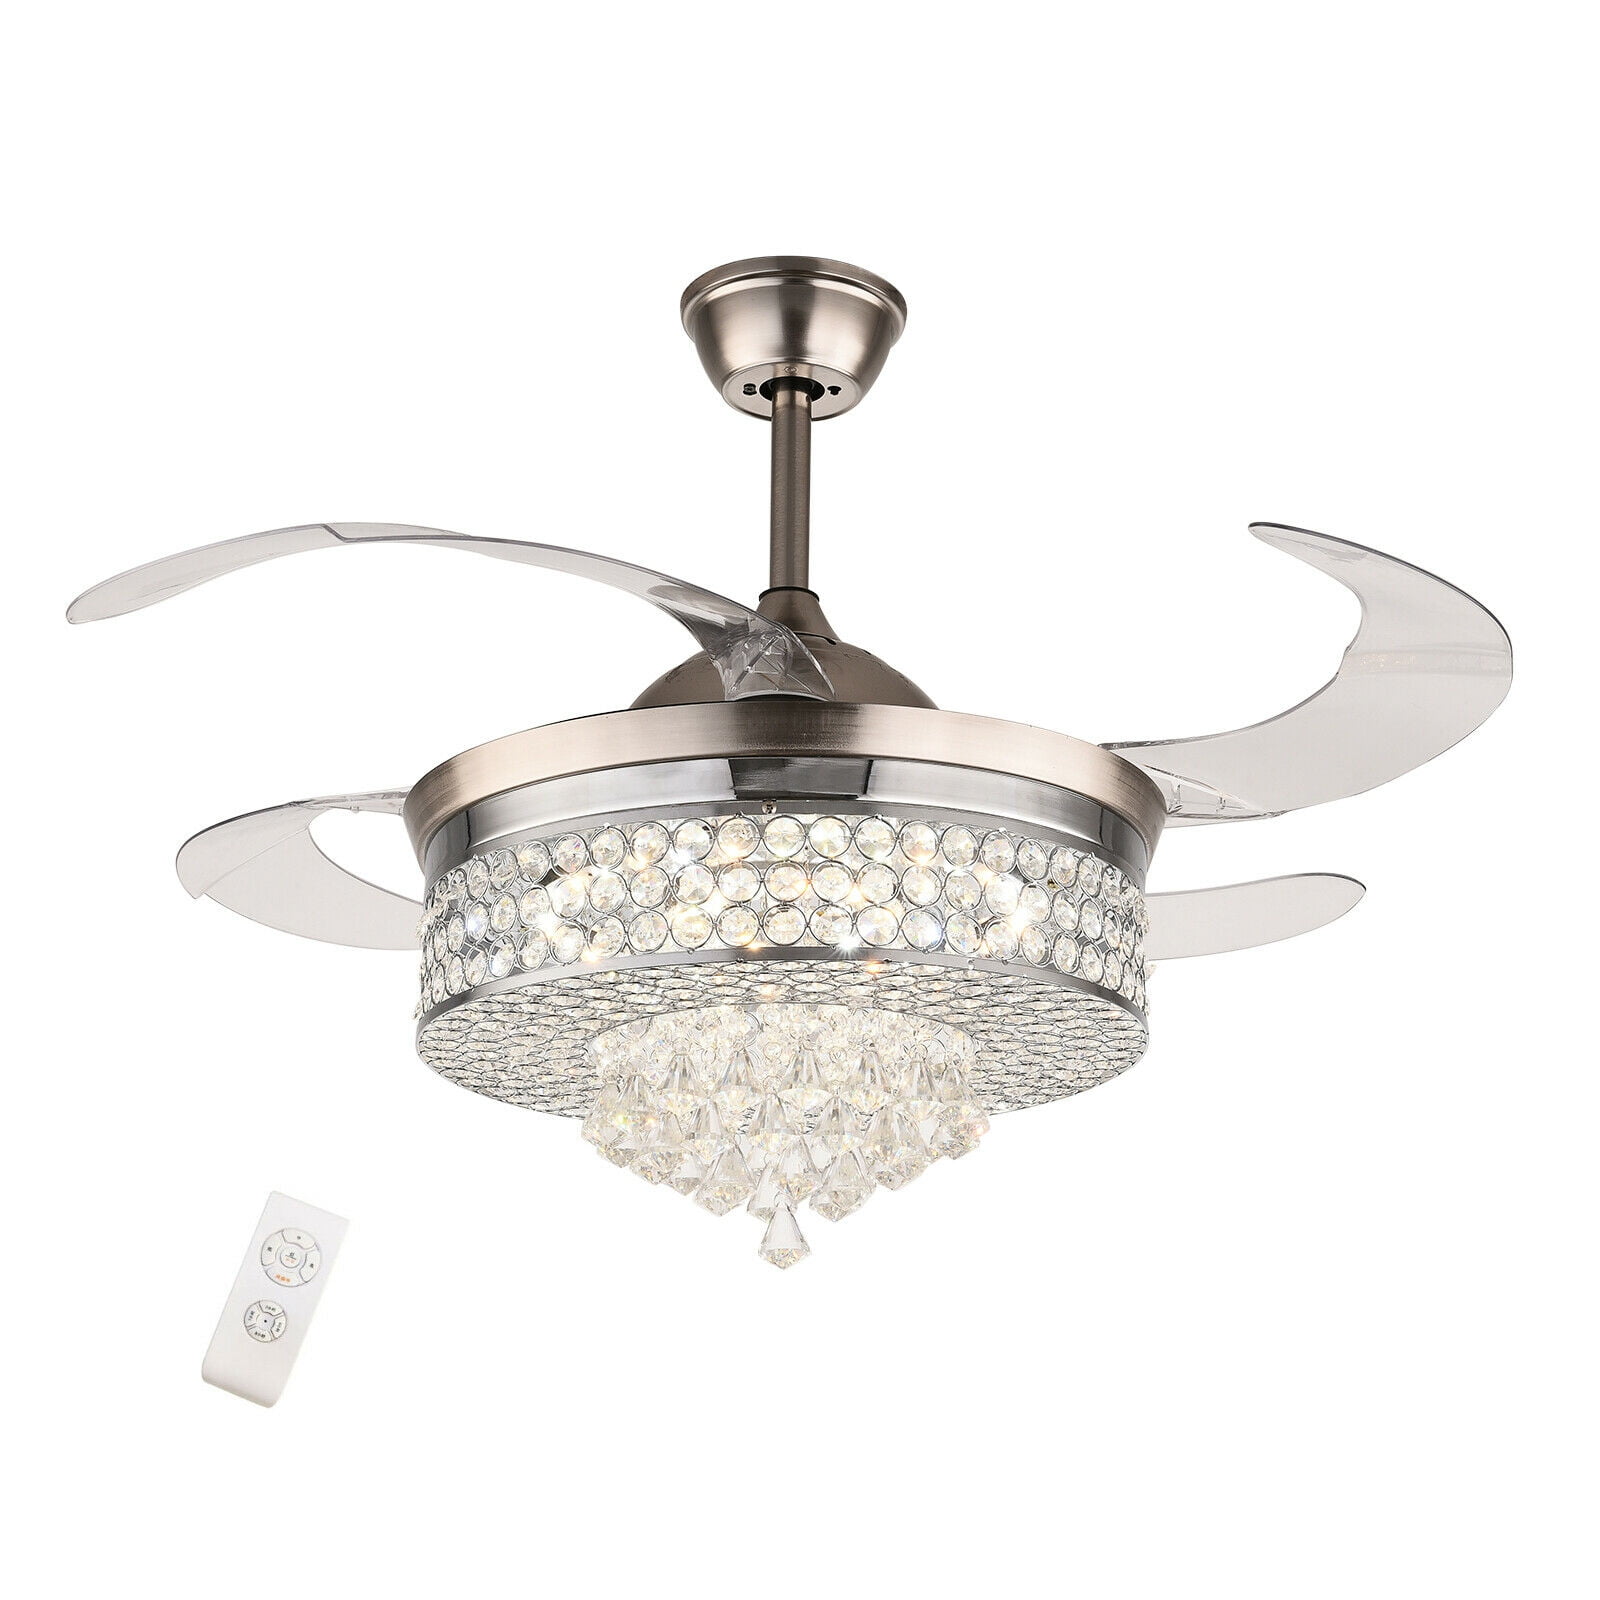 Oukaning Dimmable Retractable Ceiling